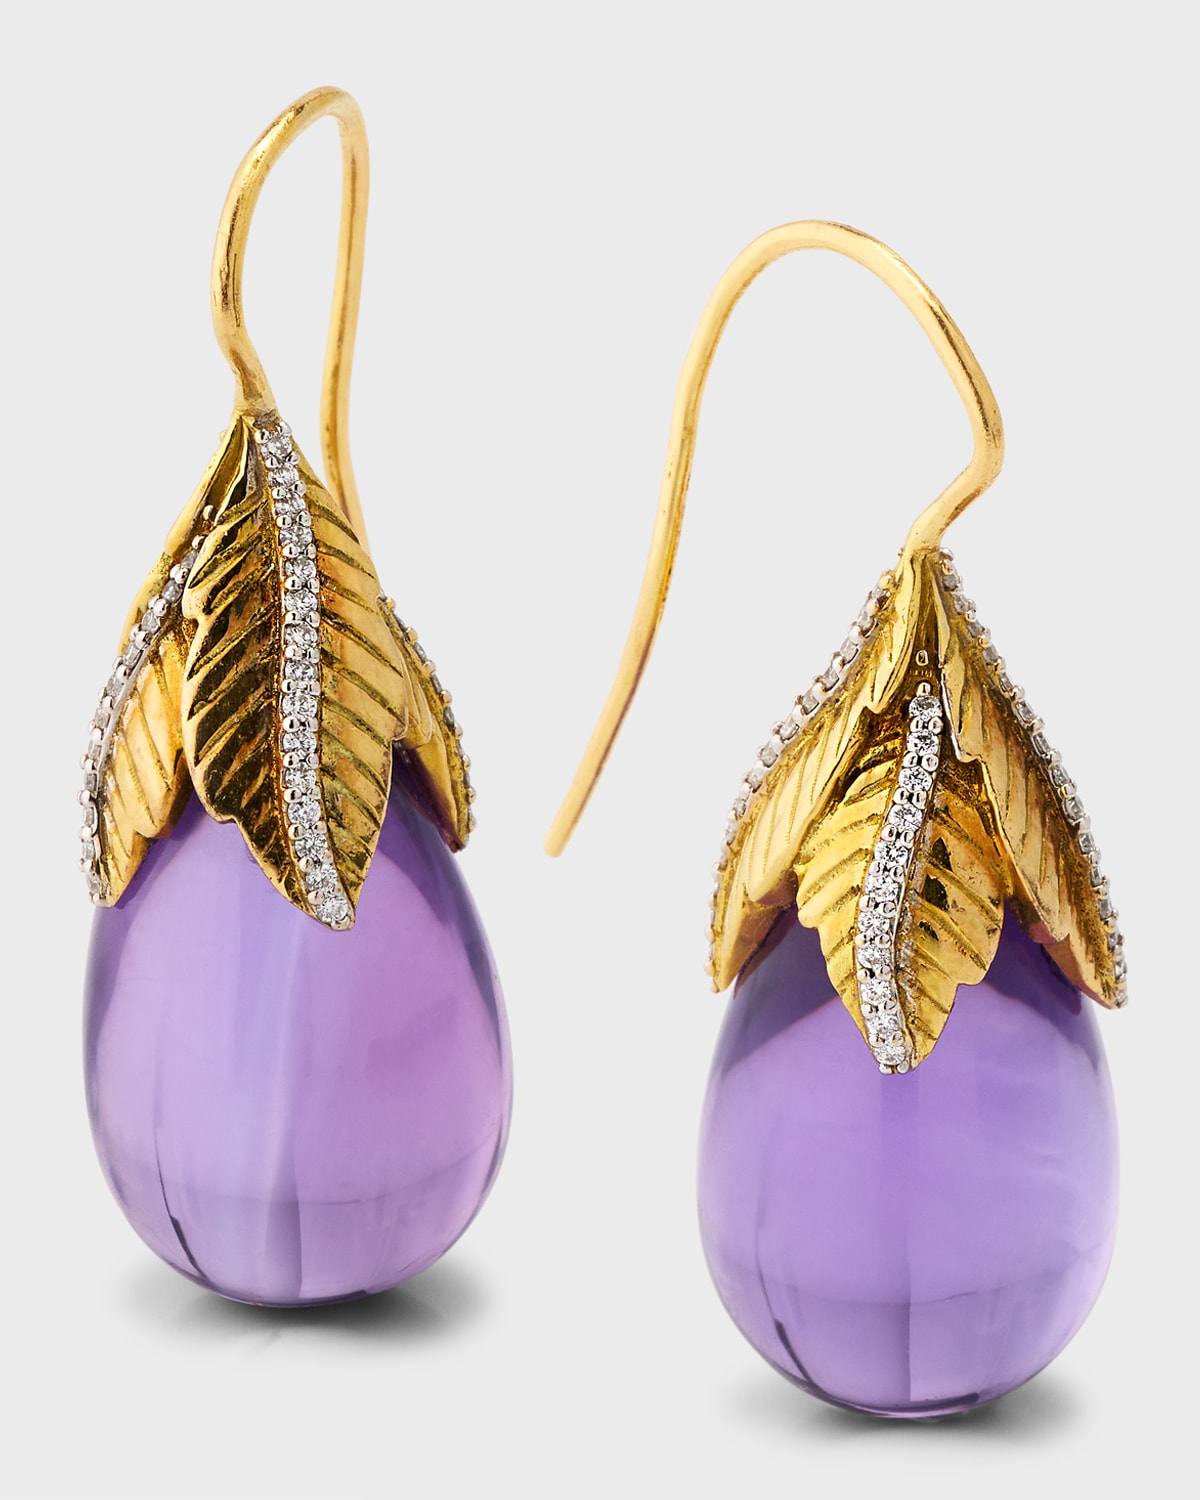 18K White and Yellow Gold Drop Amethyst Earrings with Round Diamonds, 1.5"L